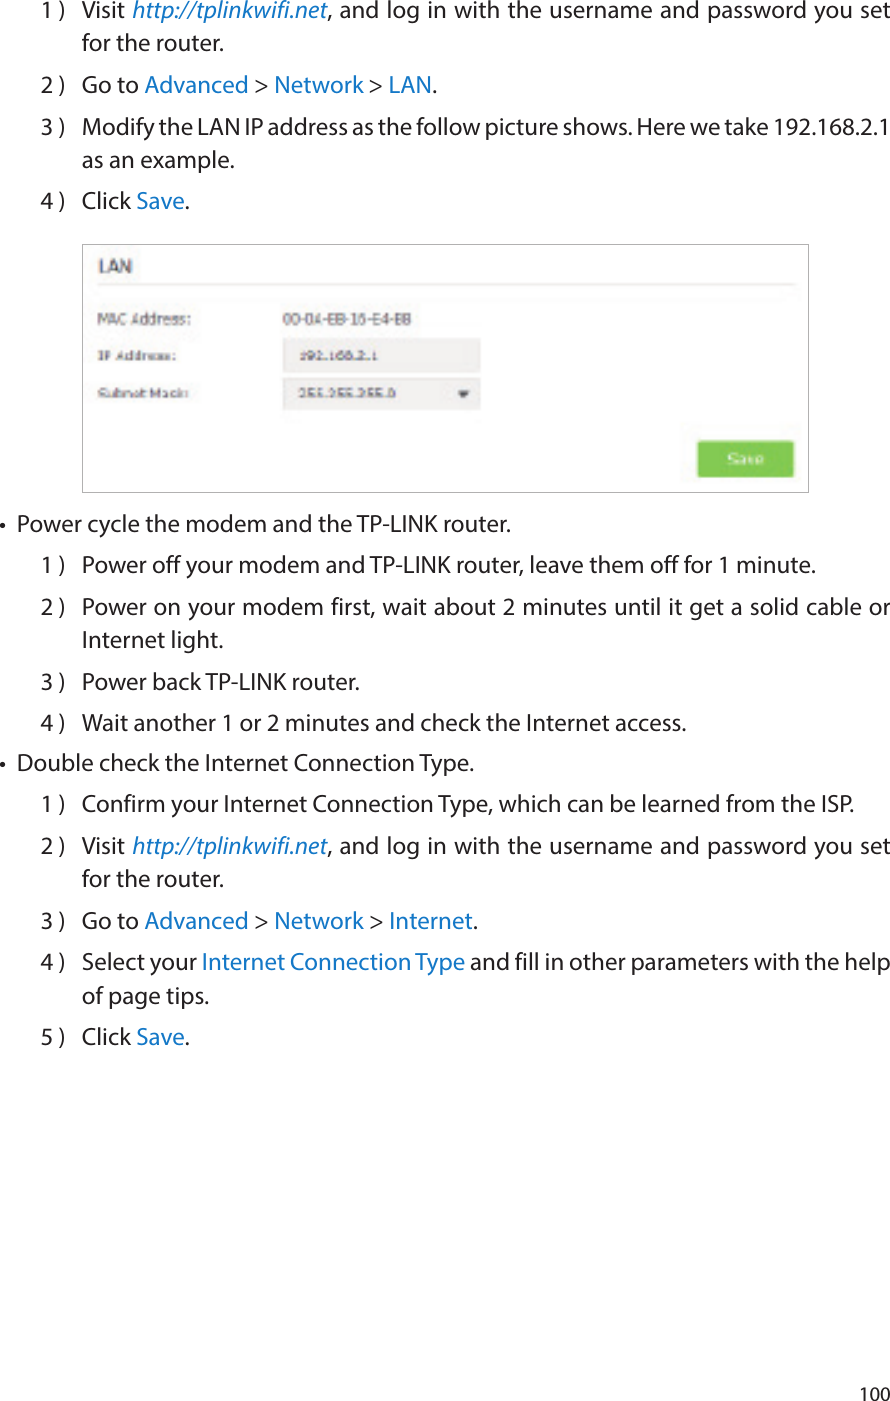 1001 )  Visit http://tplinkwifi.net, and log in with the username and password you set for the router.2 )  Go to Advanced &gt; Network &gt; LAN.3 )  Modify the LAN IP address as the follow picture shows. Here we take 192.168.2.1 as an example.4 )  Click Save.•  Power cycle the modem and the TP-LINK router.1 )  Power off your modem and TP-LINK router, leave them off for 1 minute.2 )  Power on your modem first, wait about 2 minutes until it get a solid cable or Internet light.3 )  Power back TP-LINK router.4 )  Wait another 1 or 2 minutes and check the Internet access.•  Double check the Internet Connection Type.1 )  Confirm your Internet Connection Type, which can be learned from the ISP.2 )  Visit http://tplinkwifi.net, and log in with the username and password you set for the router.3 )  Go to Advanced &gt; Network &gt; Internet.4 )  Select your Internet Connection Type and fill in other parameters with the help of page tips.5 )  Click Save.